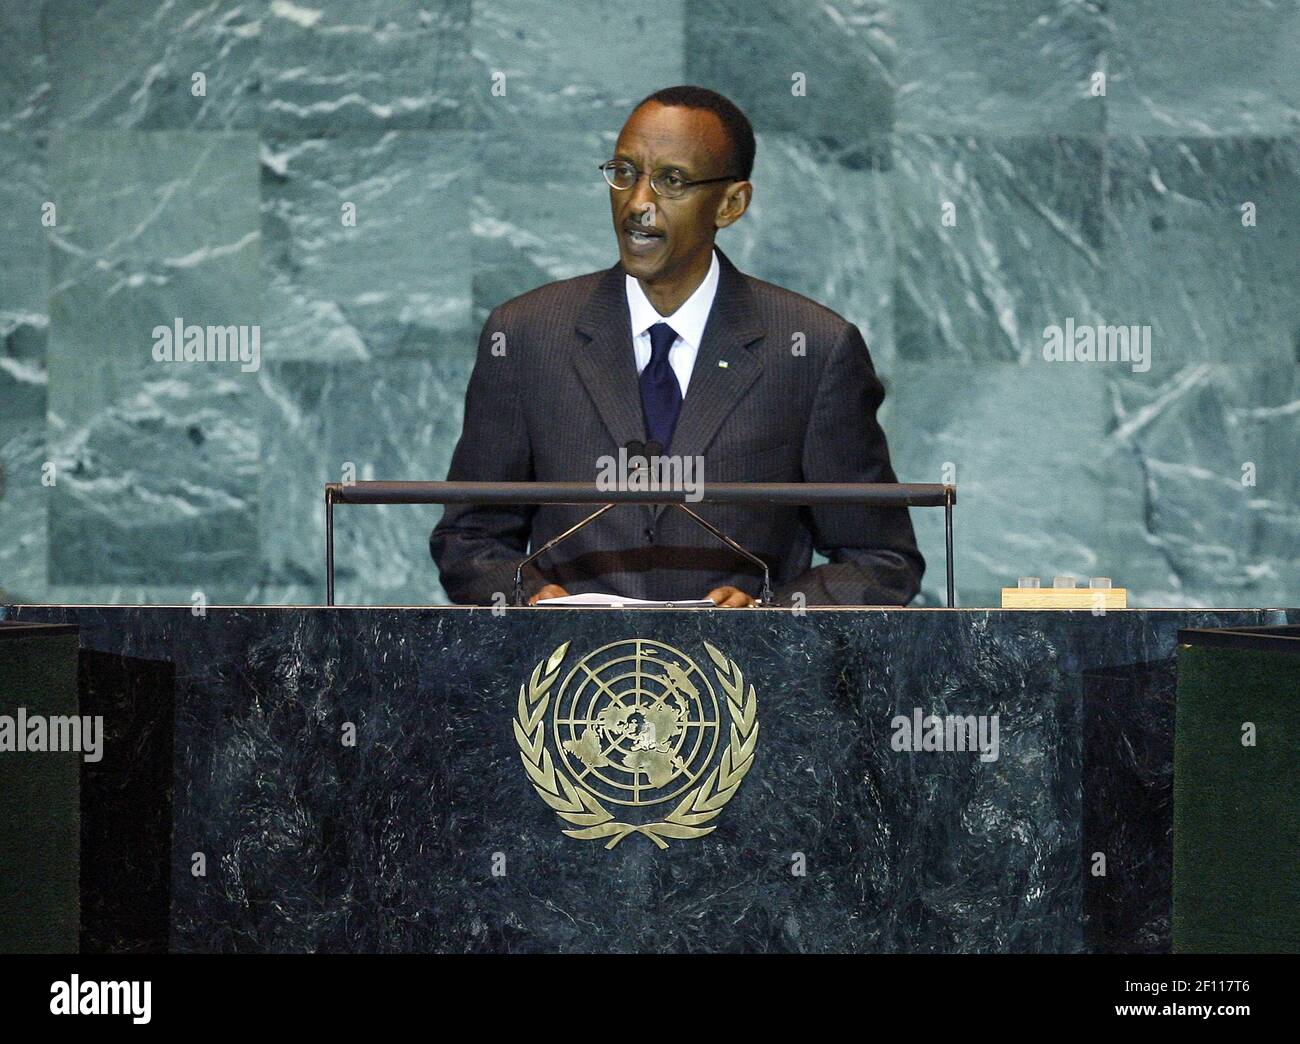 22 September 2009 - New York, NY - Paul Kagame, President of the Republic of Rwanda, addresses the opening plenary session of the Summit on Climate Change. Convened by Secretary-General Ban Ki-moon, the Summit aims at mobilizing the highest level political will needed to reach a fair, effective, and scientifically ambitious global climate deal at the United Nations Climate Change Conference in Copenhagen this December. Photo Credit: Marco Castro/UN Photo/Sipa Press/0909222122 Stock Photo